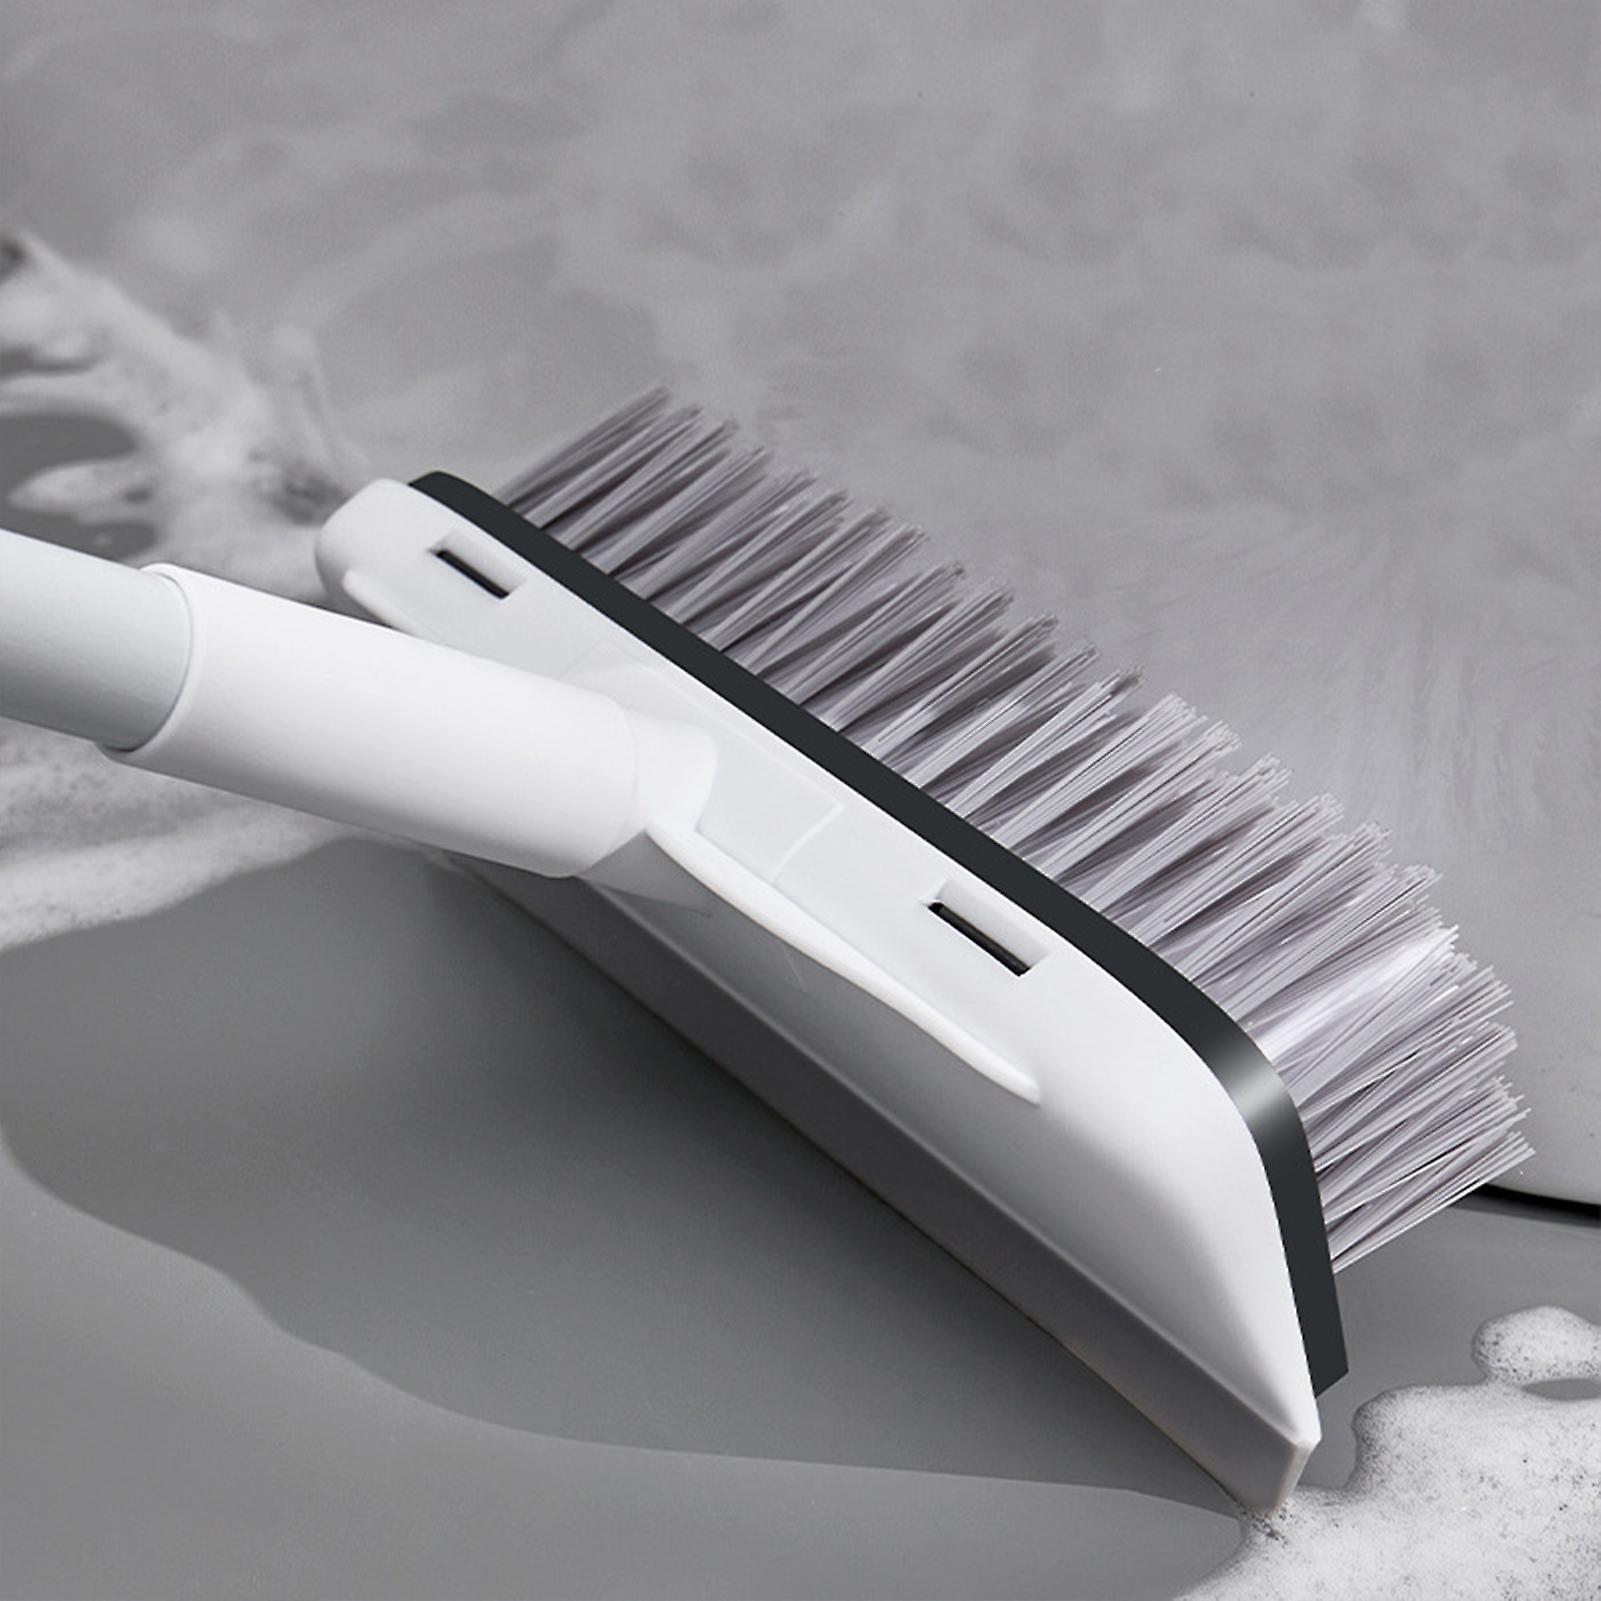 Floor cleaning brush 2 in 1 brush head with squeegee